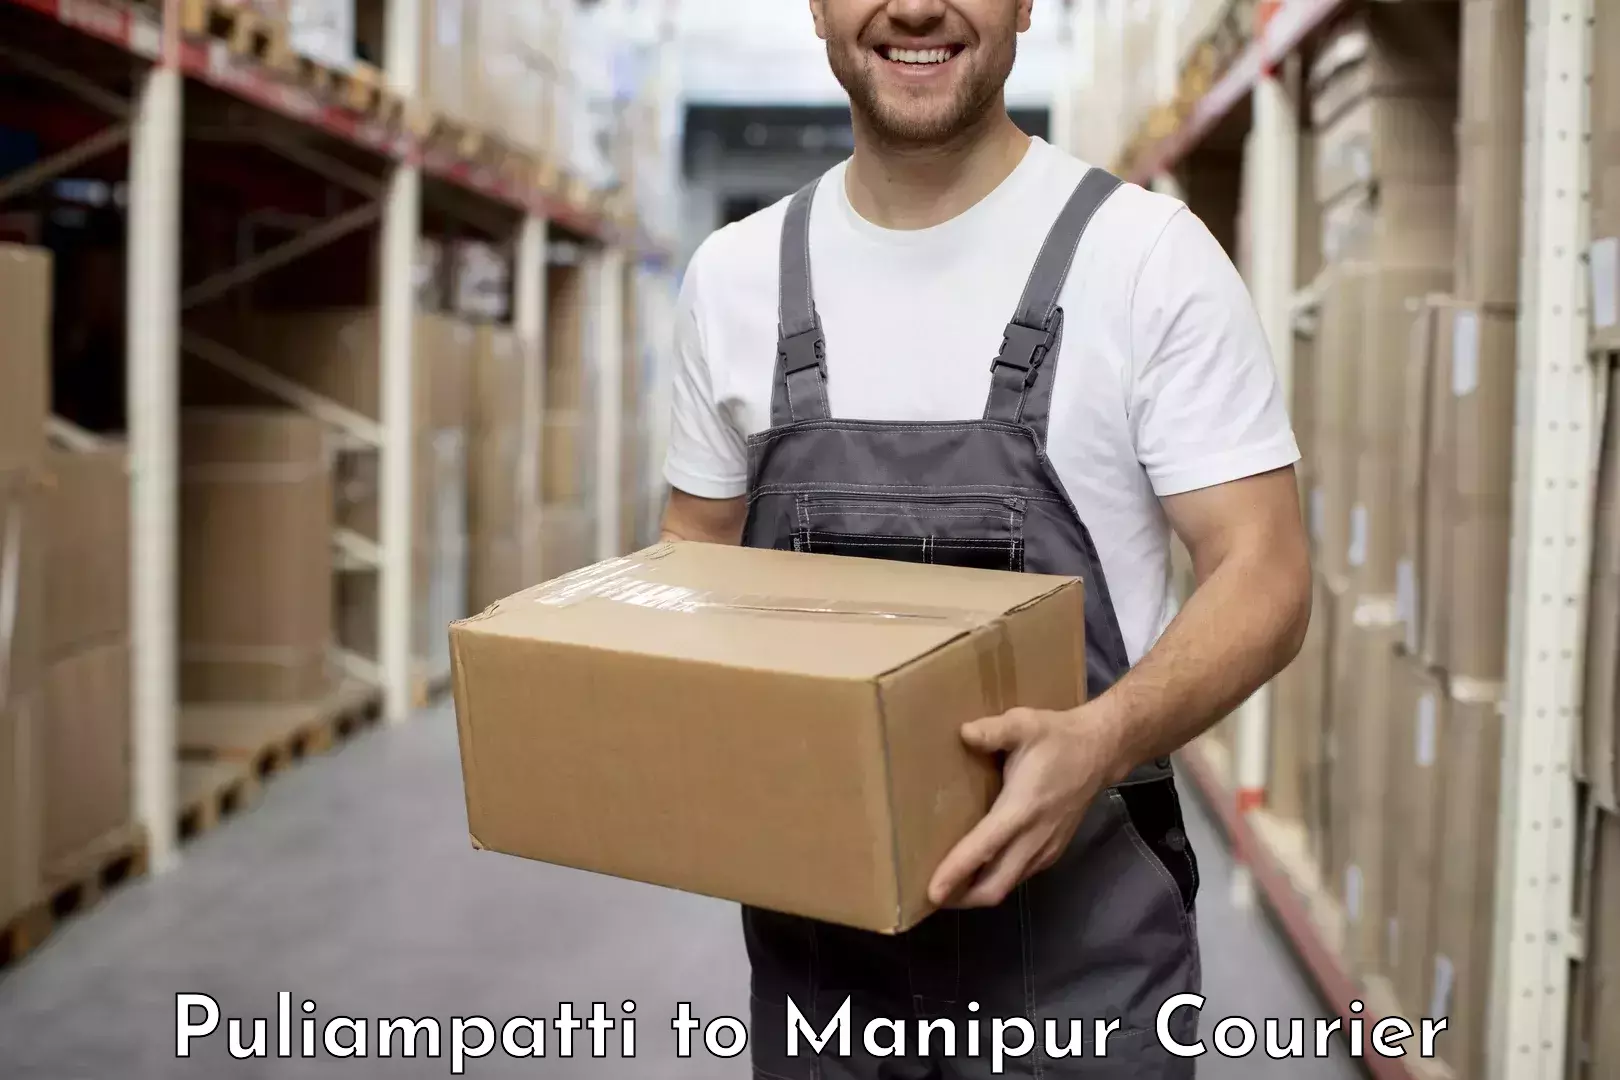 Affordable parcel service Puliampatti to Manipur